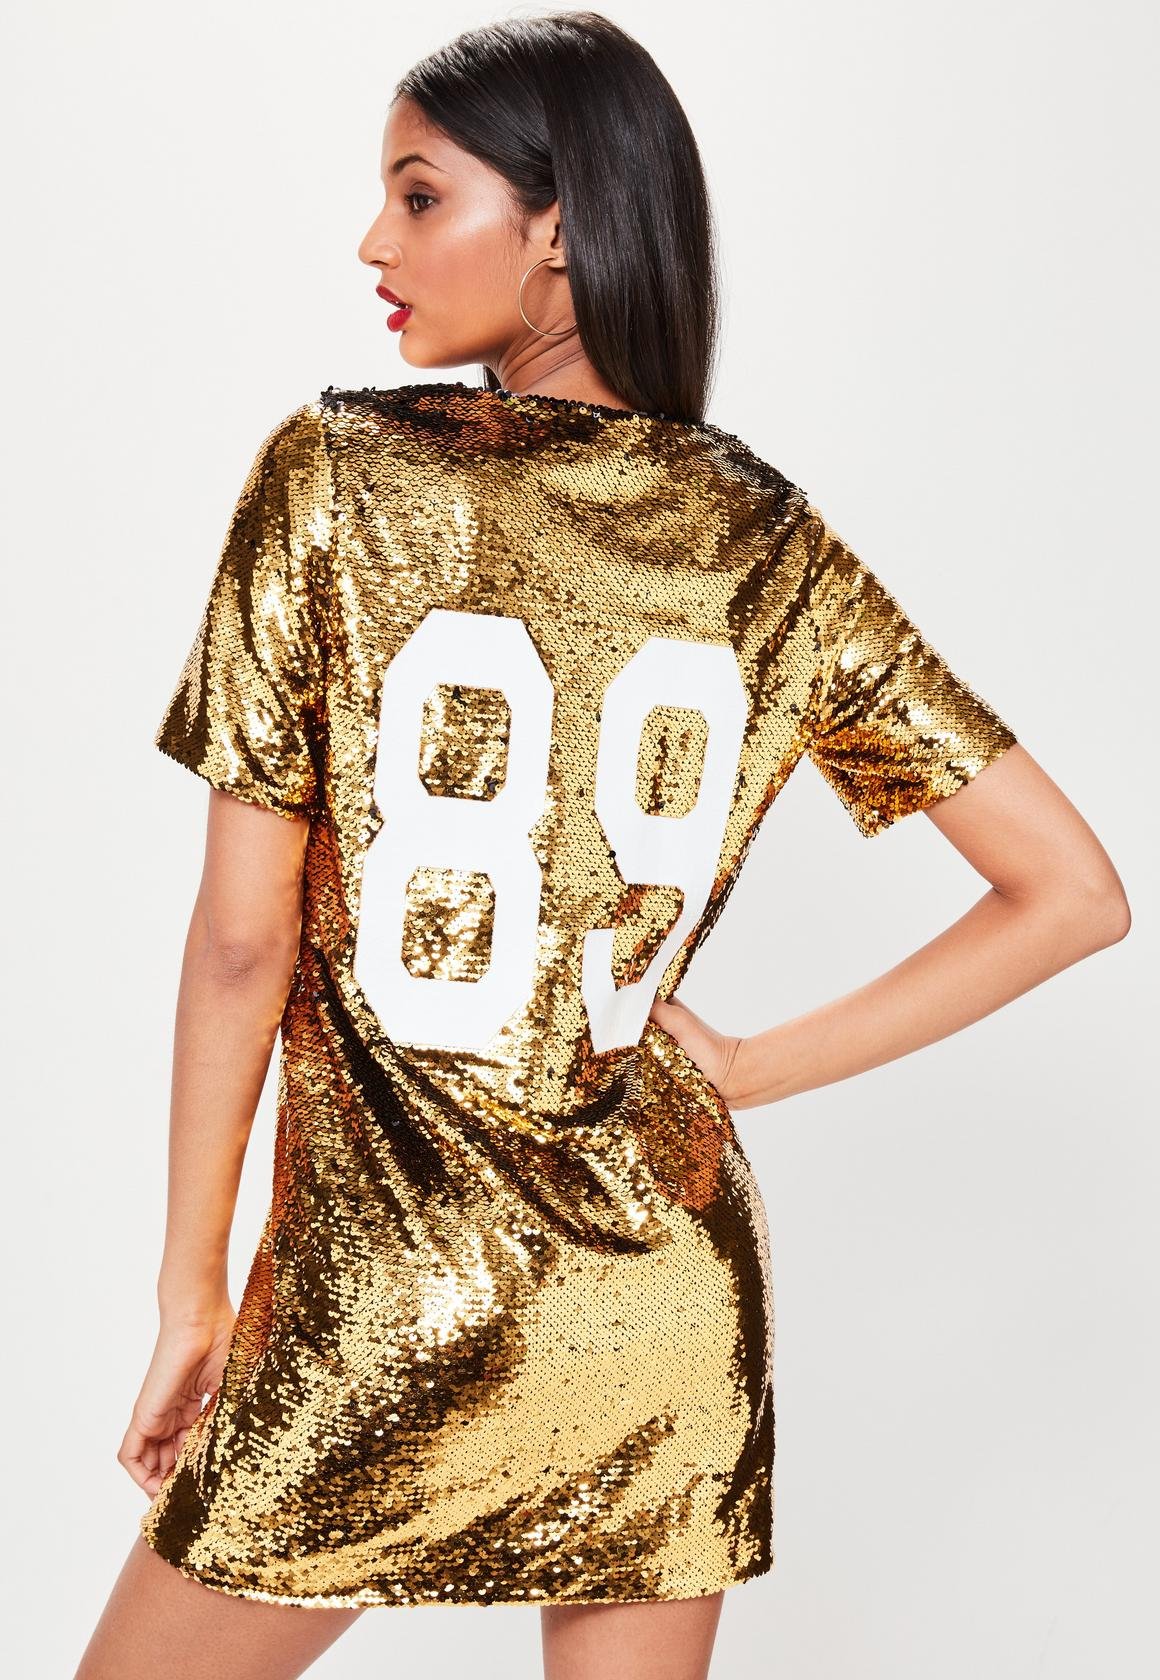 Sequins Are Making a Comeback & Here’s Your Ultimate Guide to Getting ...